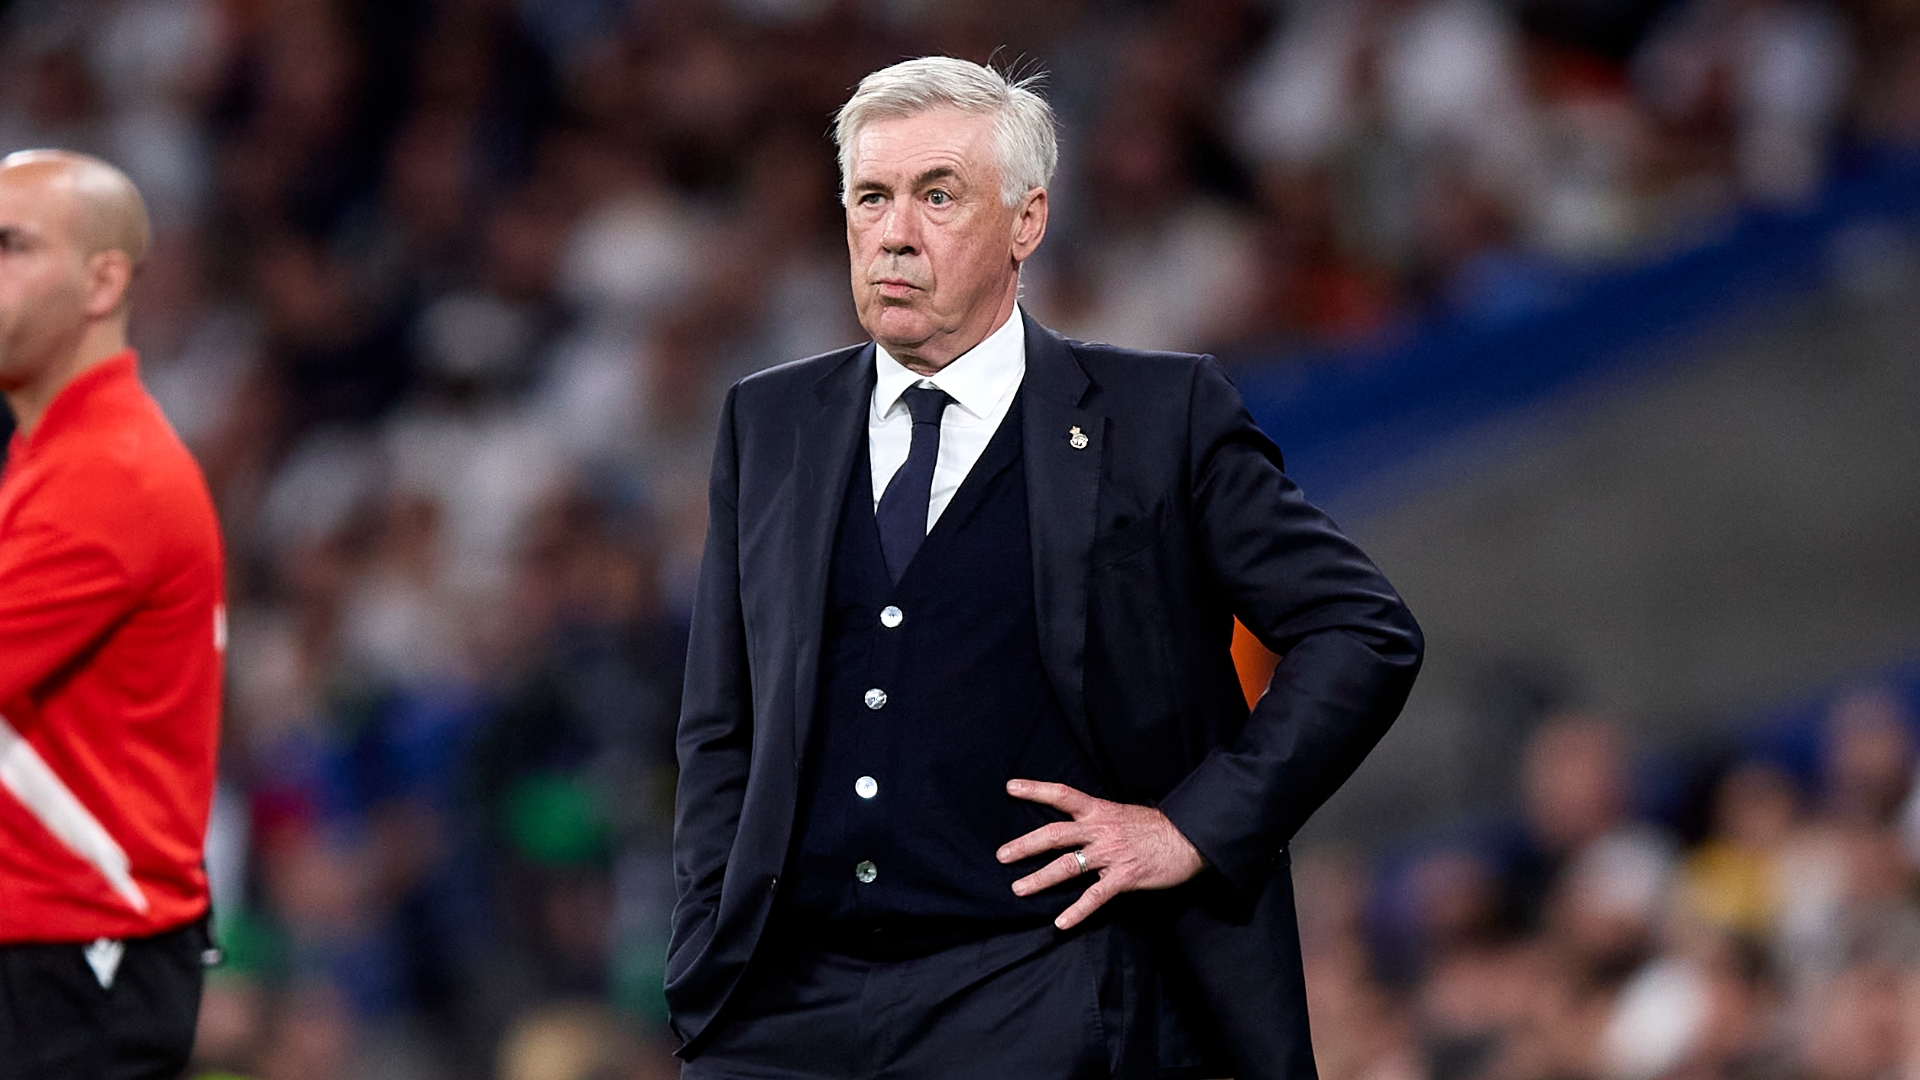 Ancelotti: To be honest, I don't think that was goal